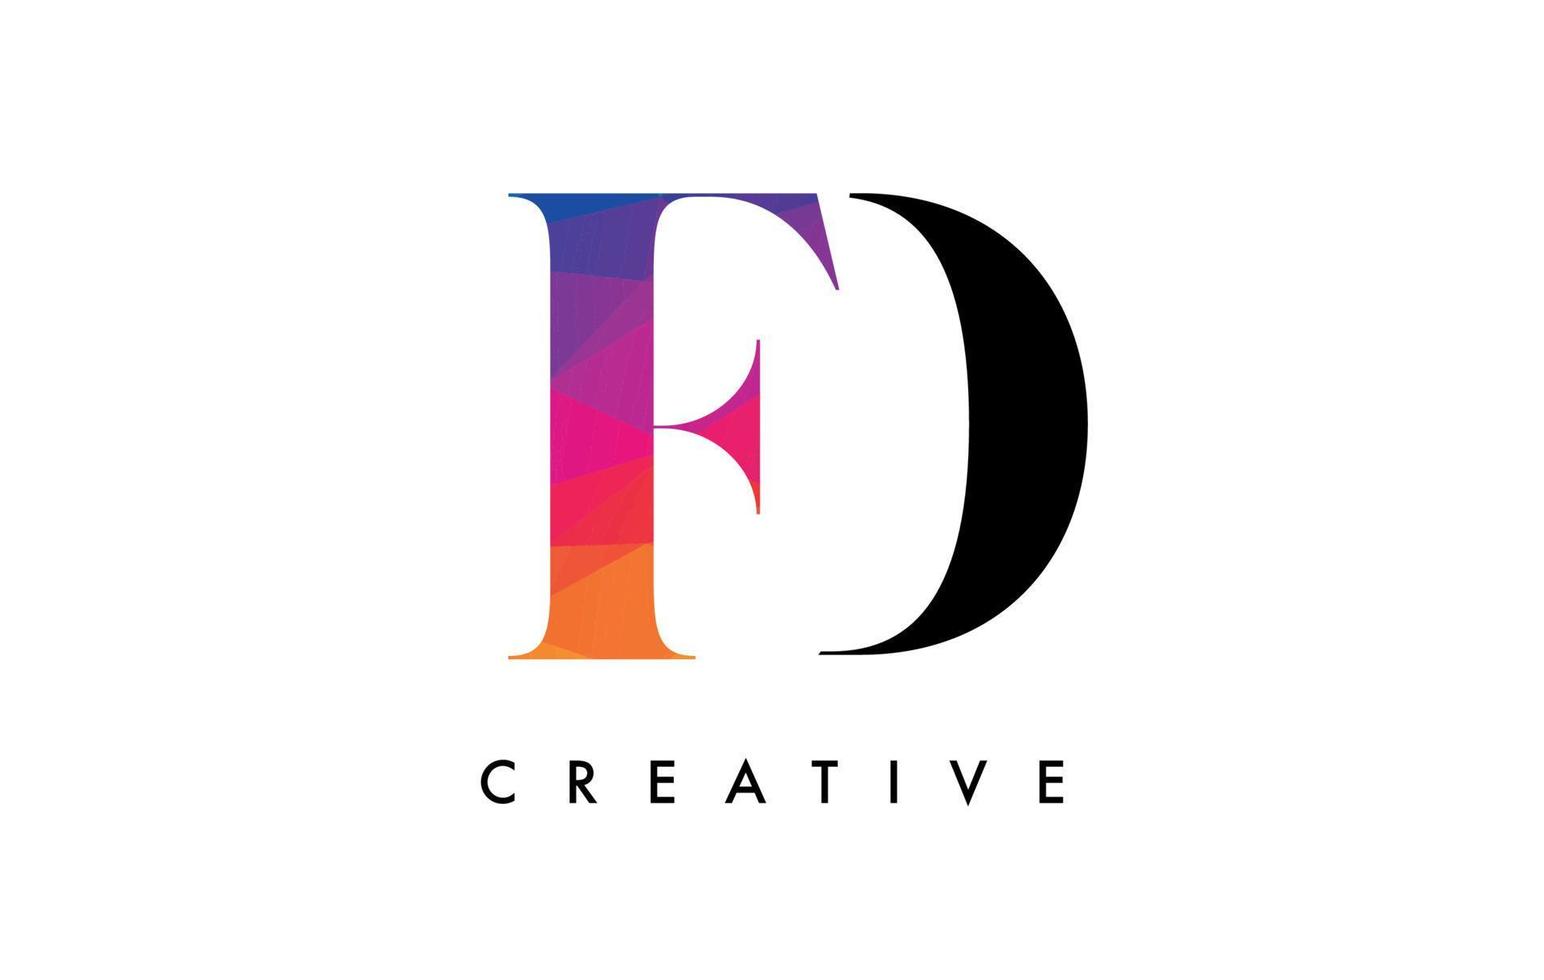 FD Letter Design with Creative Cut and Colorful Rainbow Texture vector